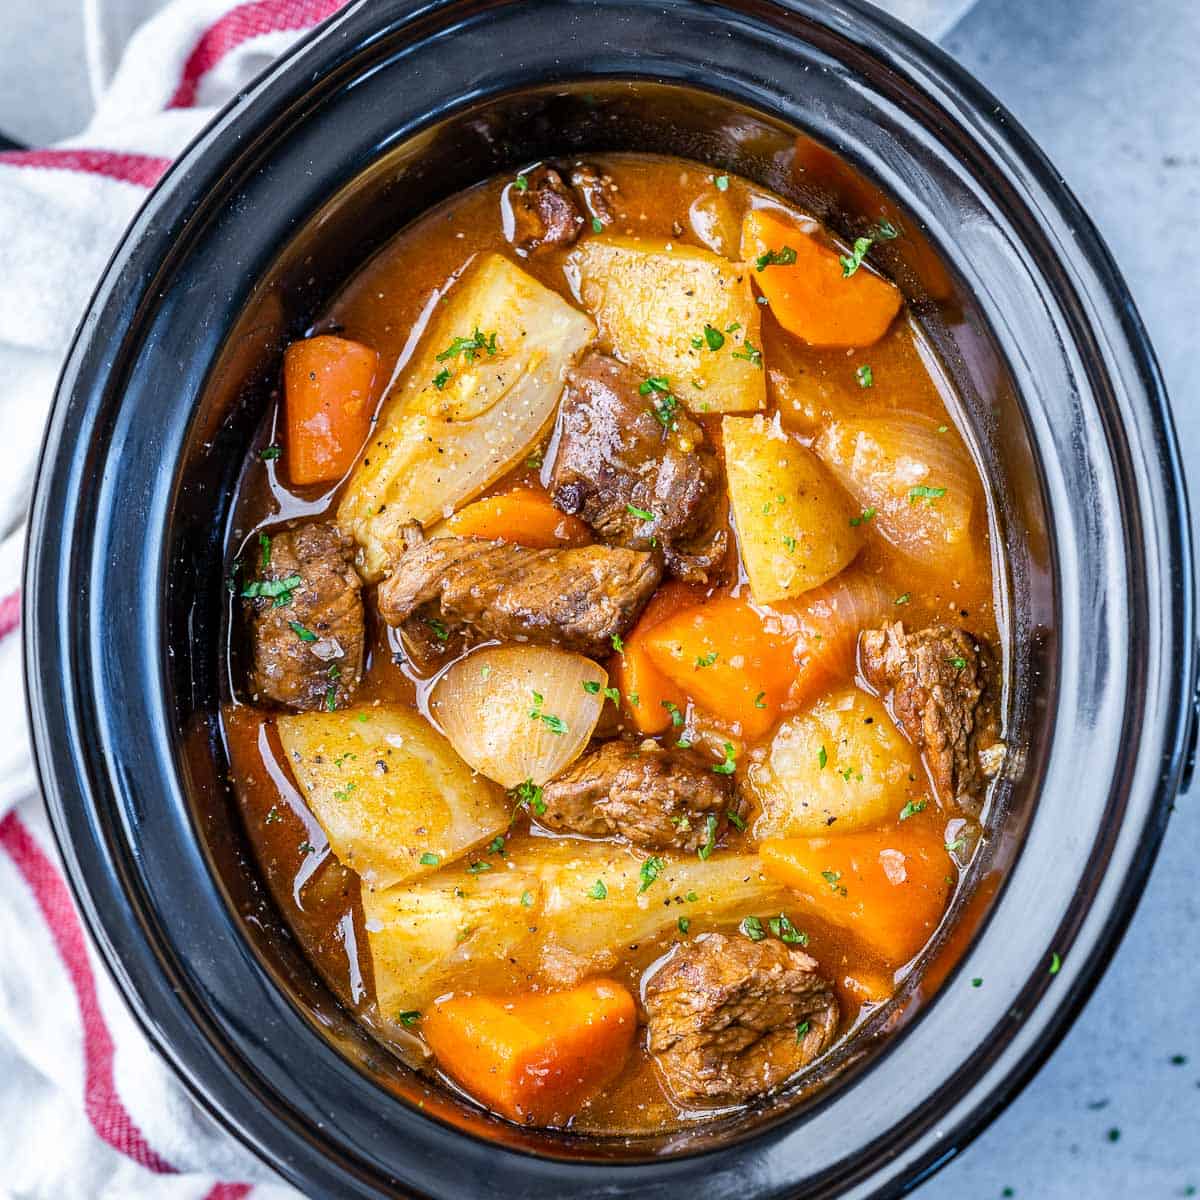 top view of beef stew in a black slow cooker dish